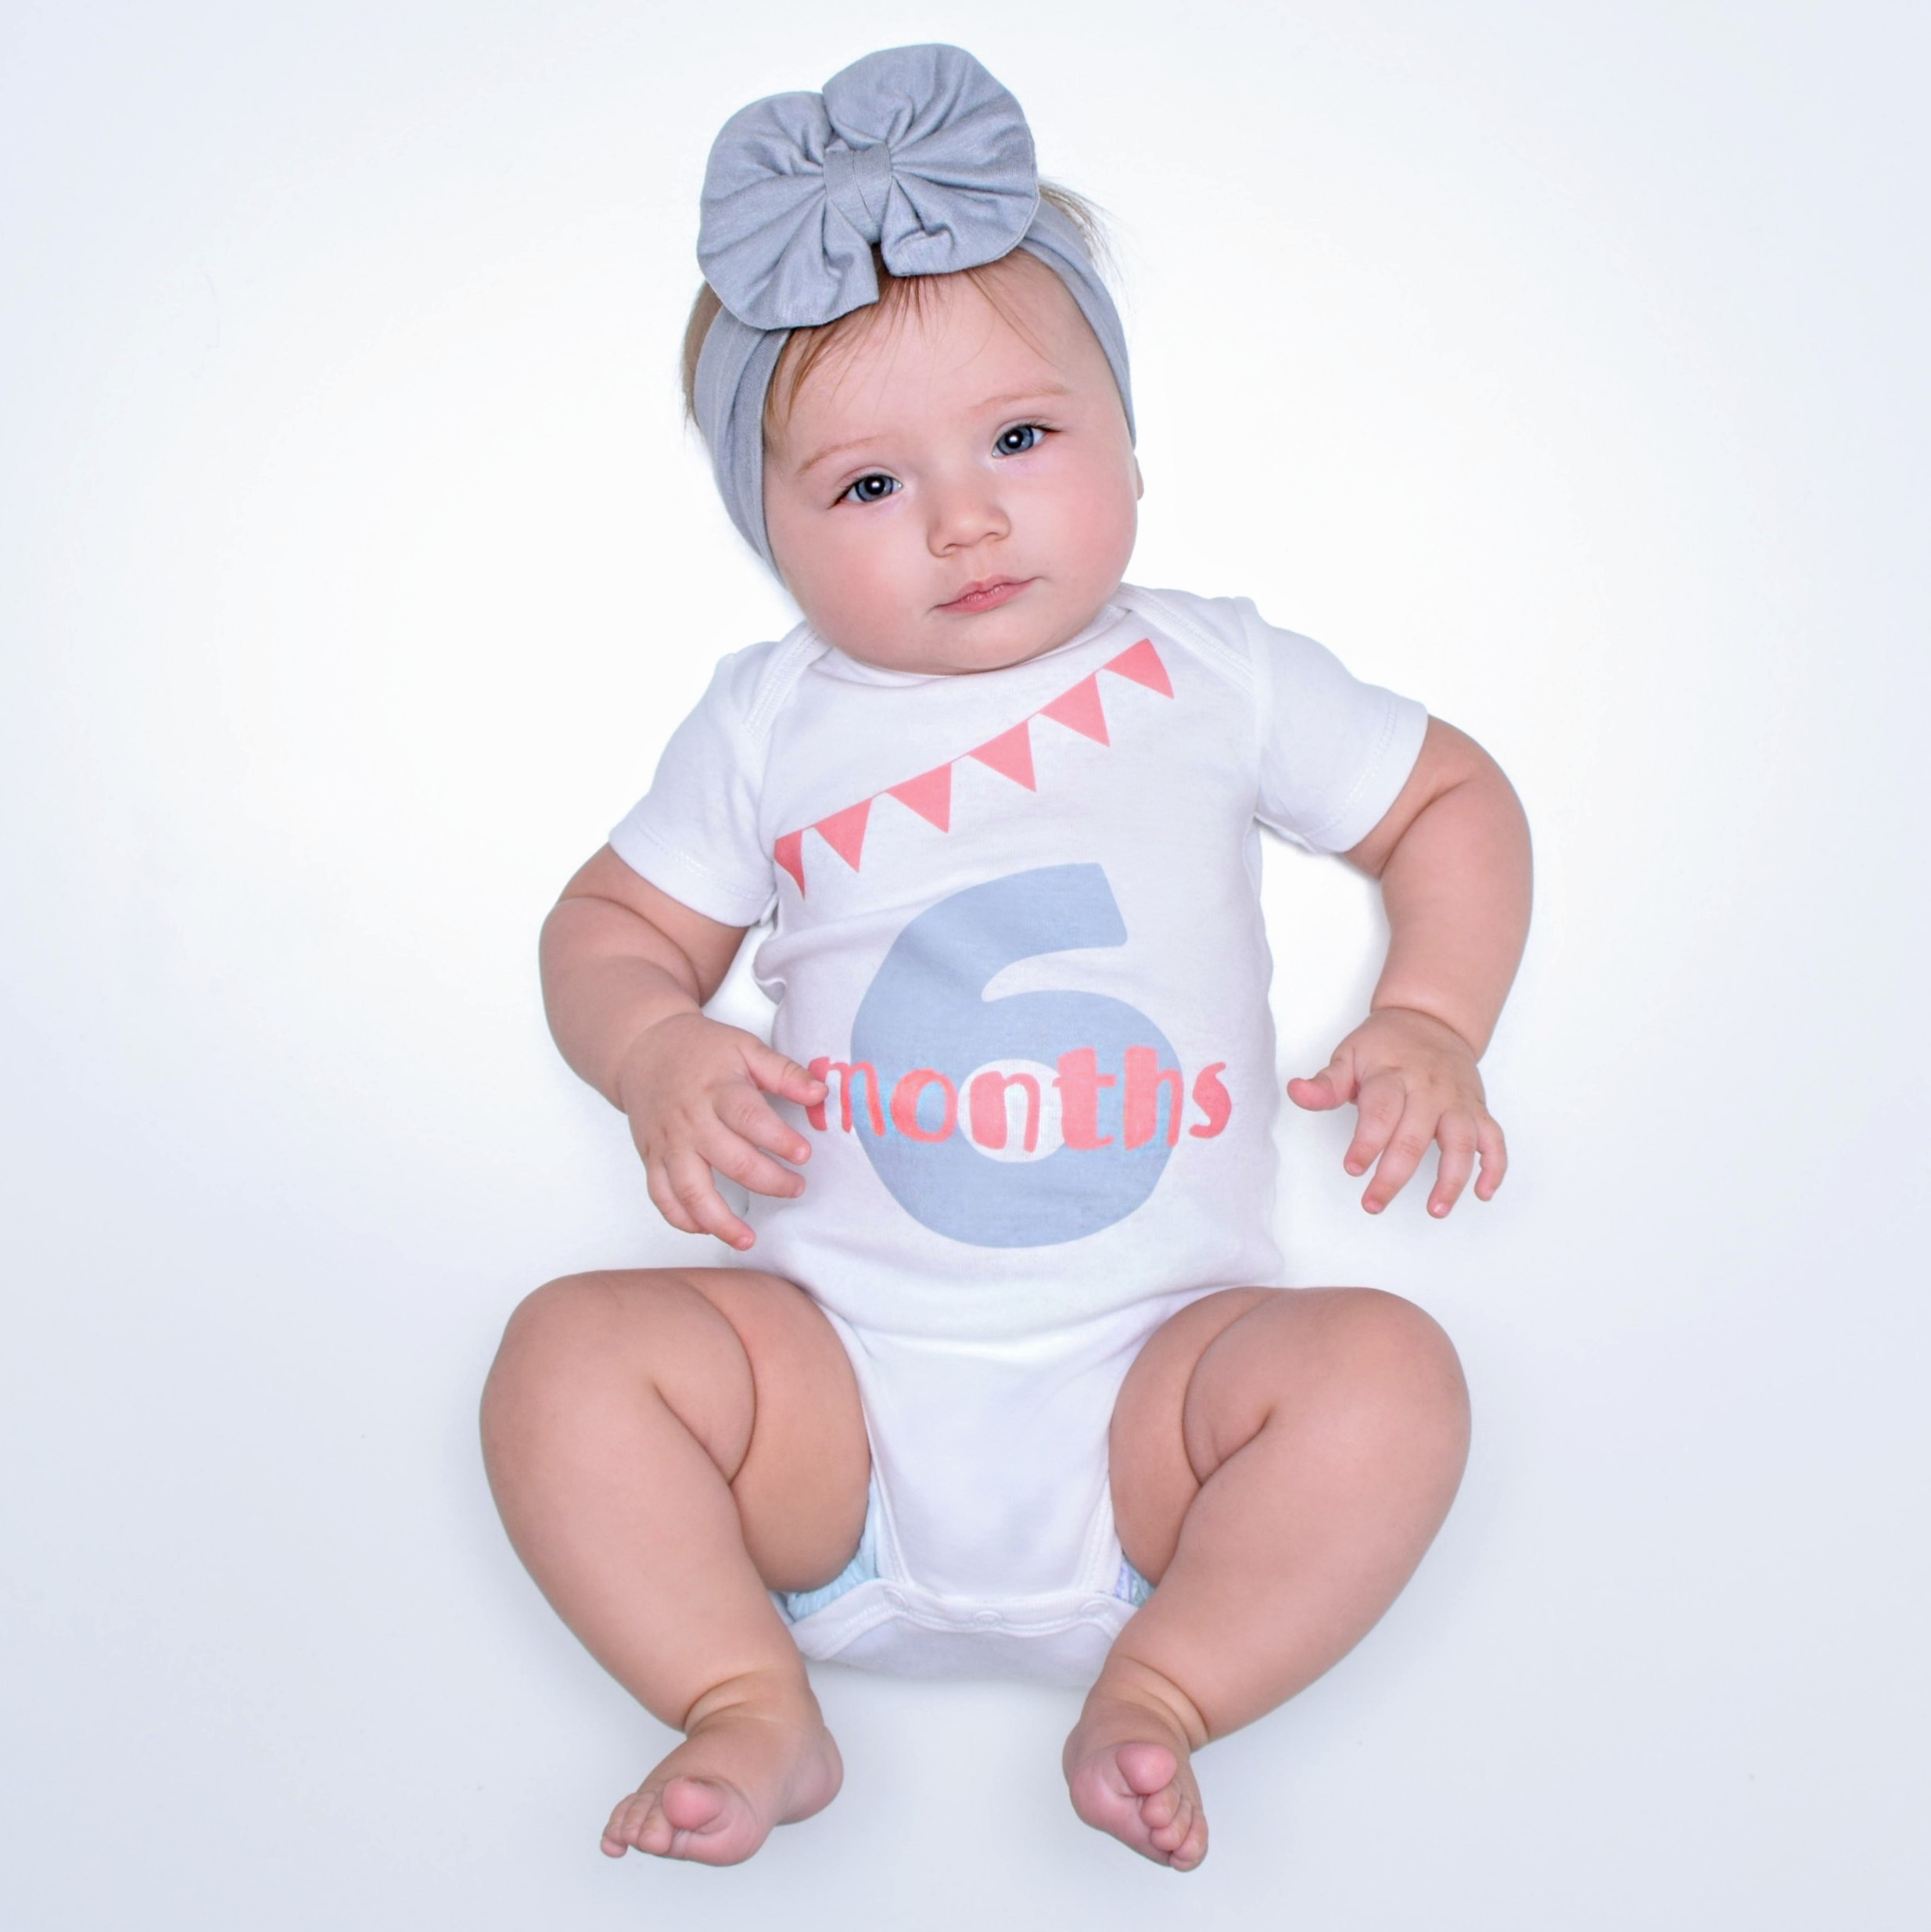 6 month old baby outfit